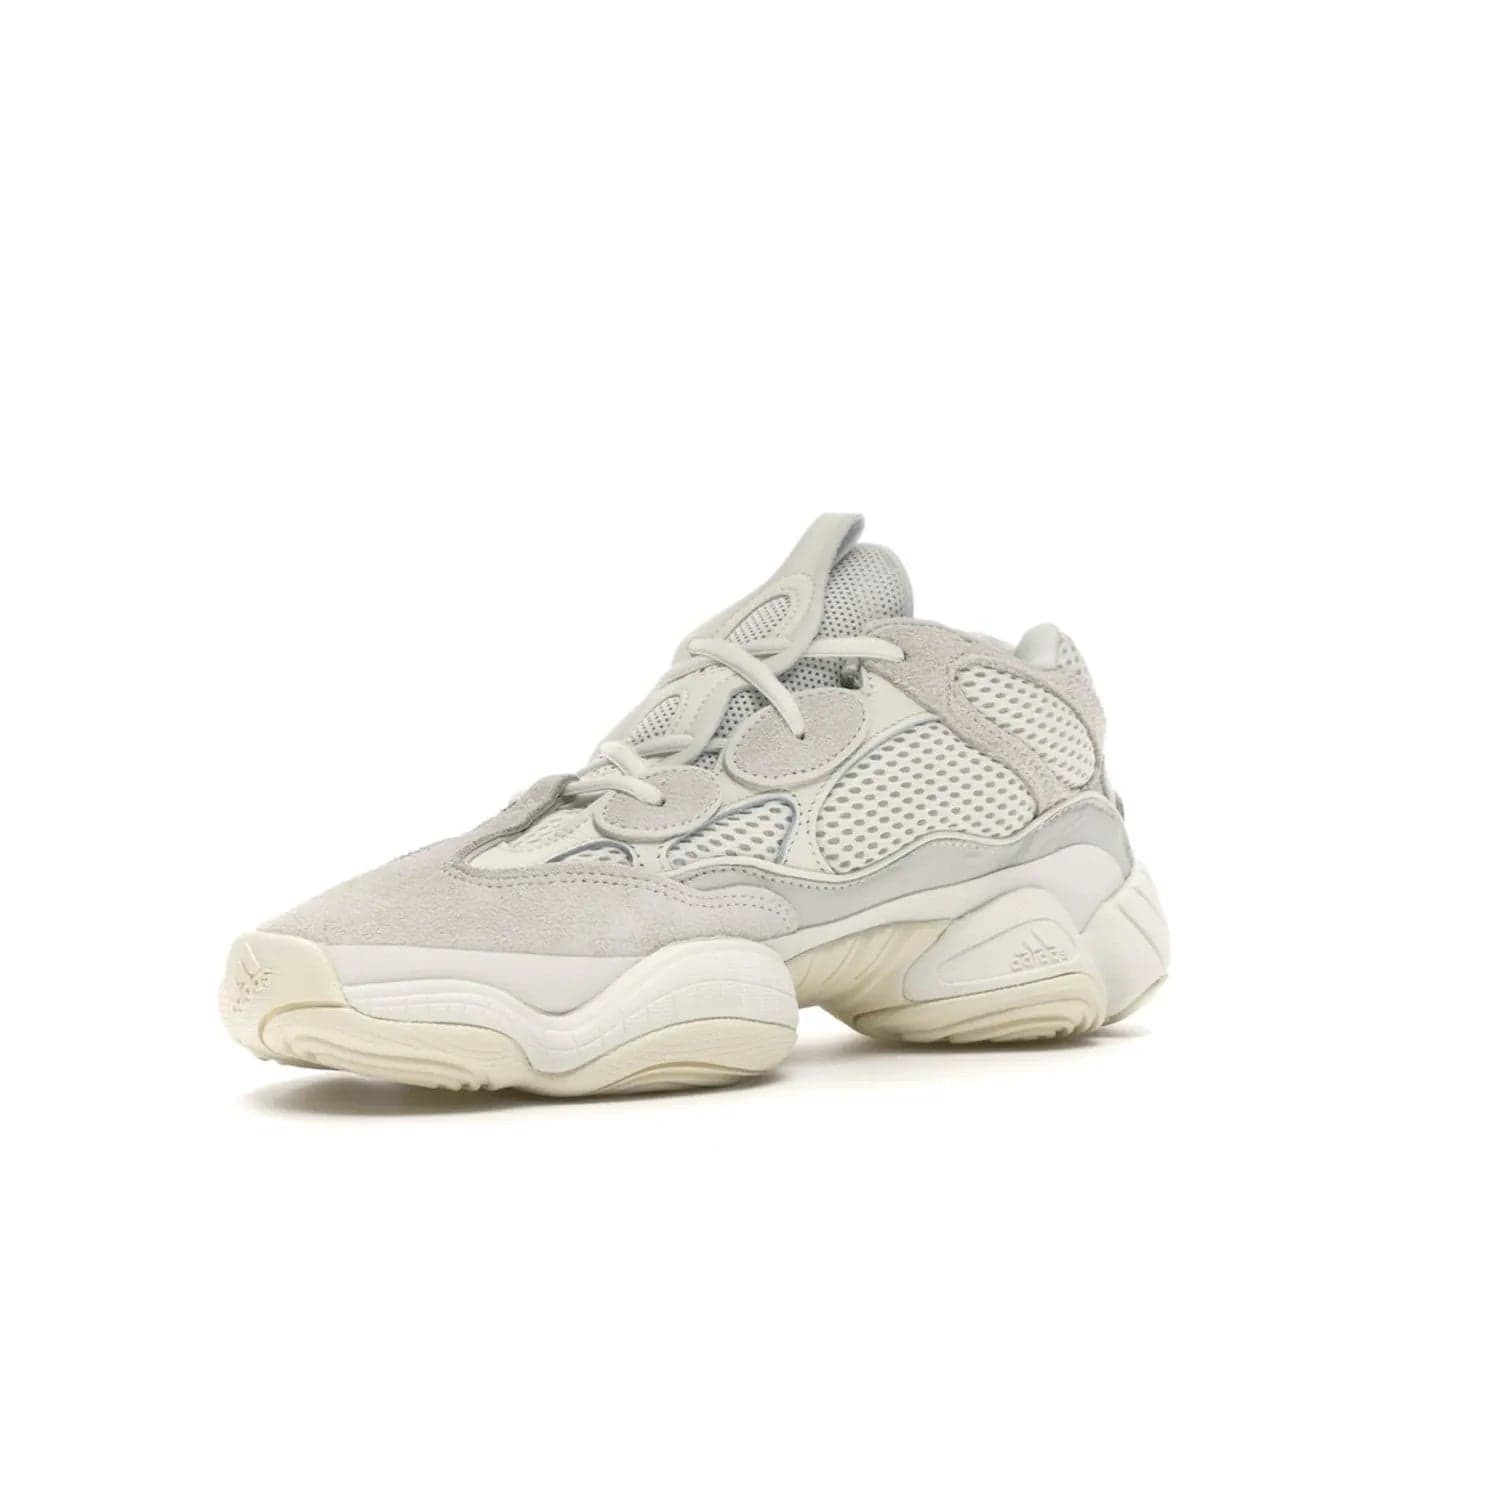 adidas Yeezy 500 Bone White - Image 15 - Only at www.BallersClubKickz.com - Classic look perfect for any sneaker collection. The adidas Yeezy 500 "Bone White" blends a white mesh upper with suede overlays & a chunky midsole inspired by the Adidas KB3. Complimented by a tonal-cream outsole, this timeless style is a must-have.